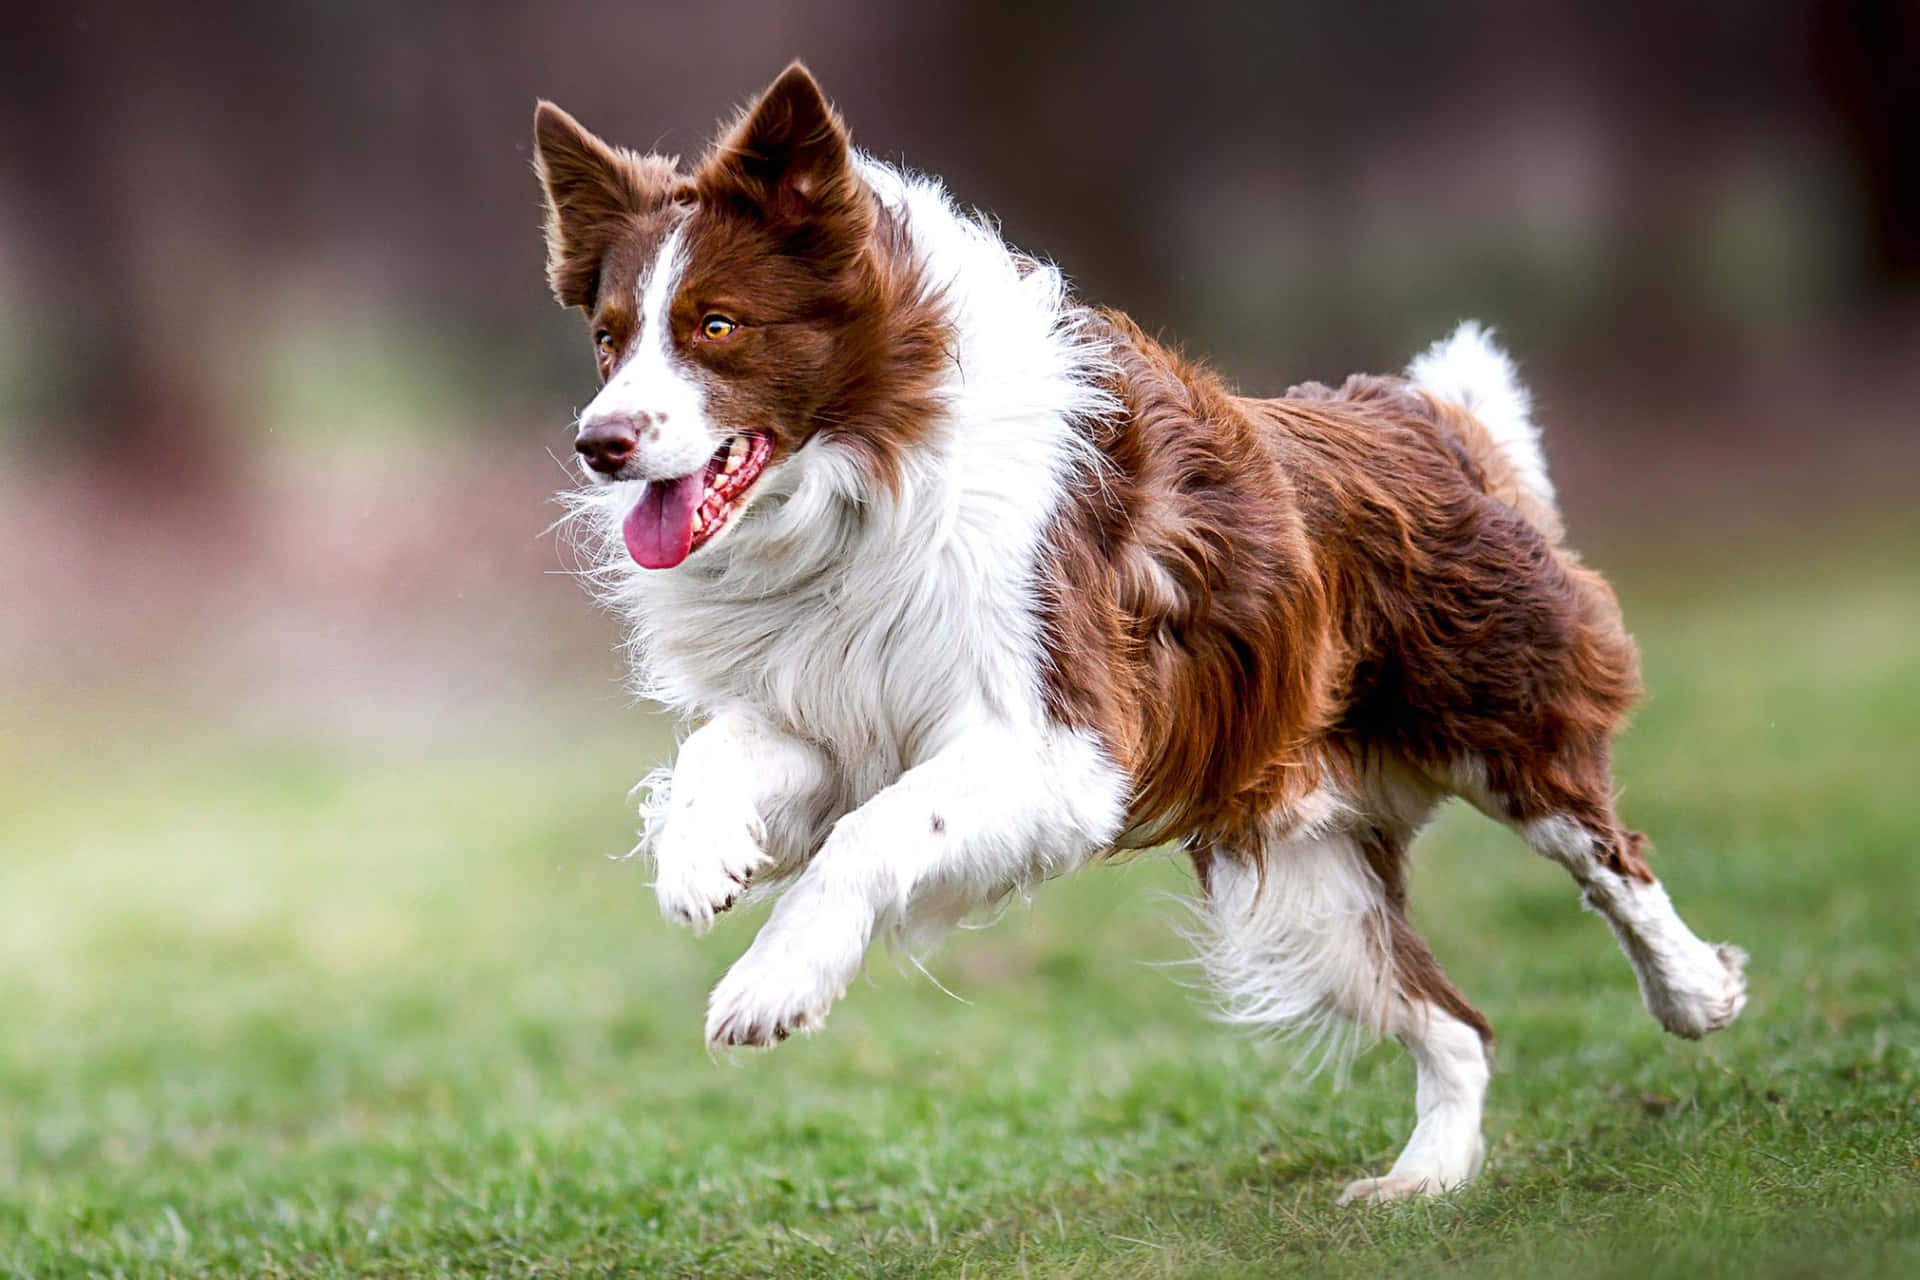 Red Border Collie Dog Jumping Picture